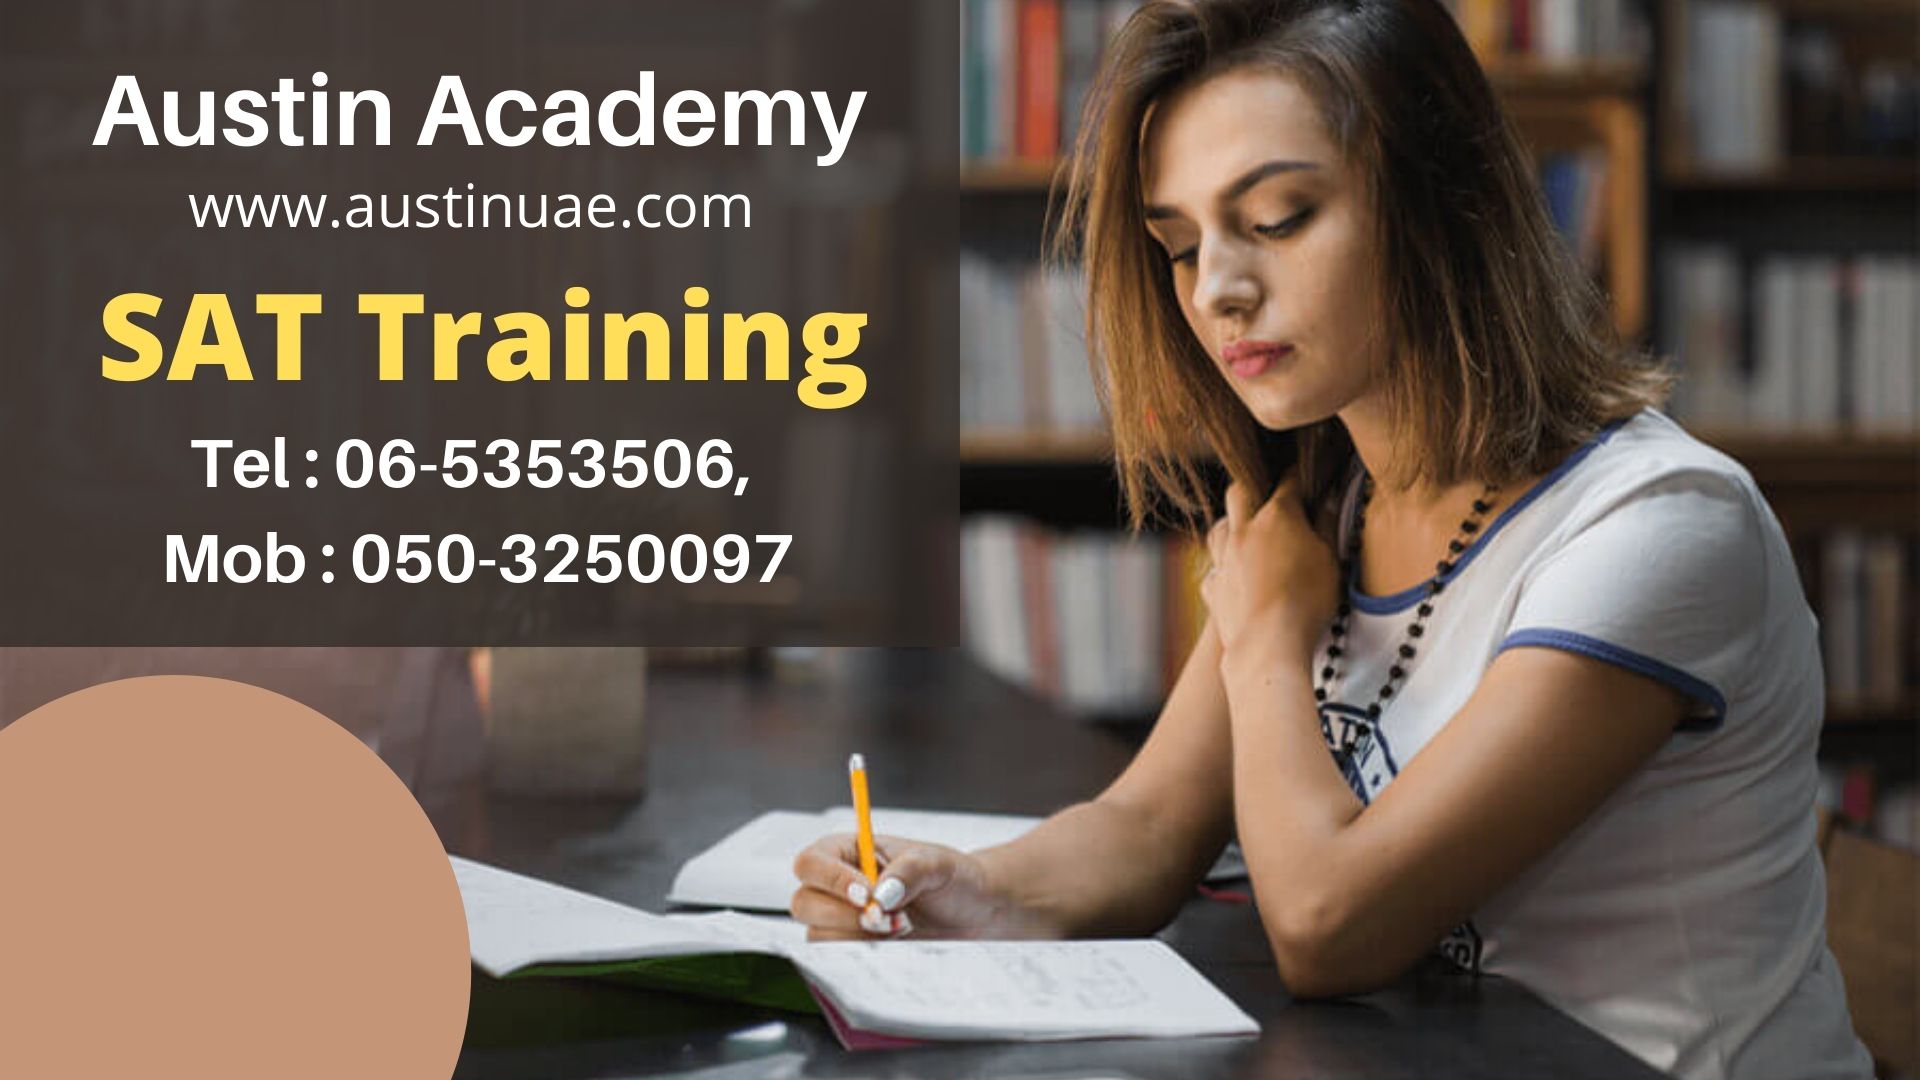 Sat Training In Sharjah With Best Offer 0588197415